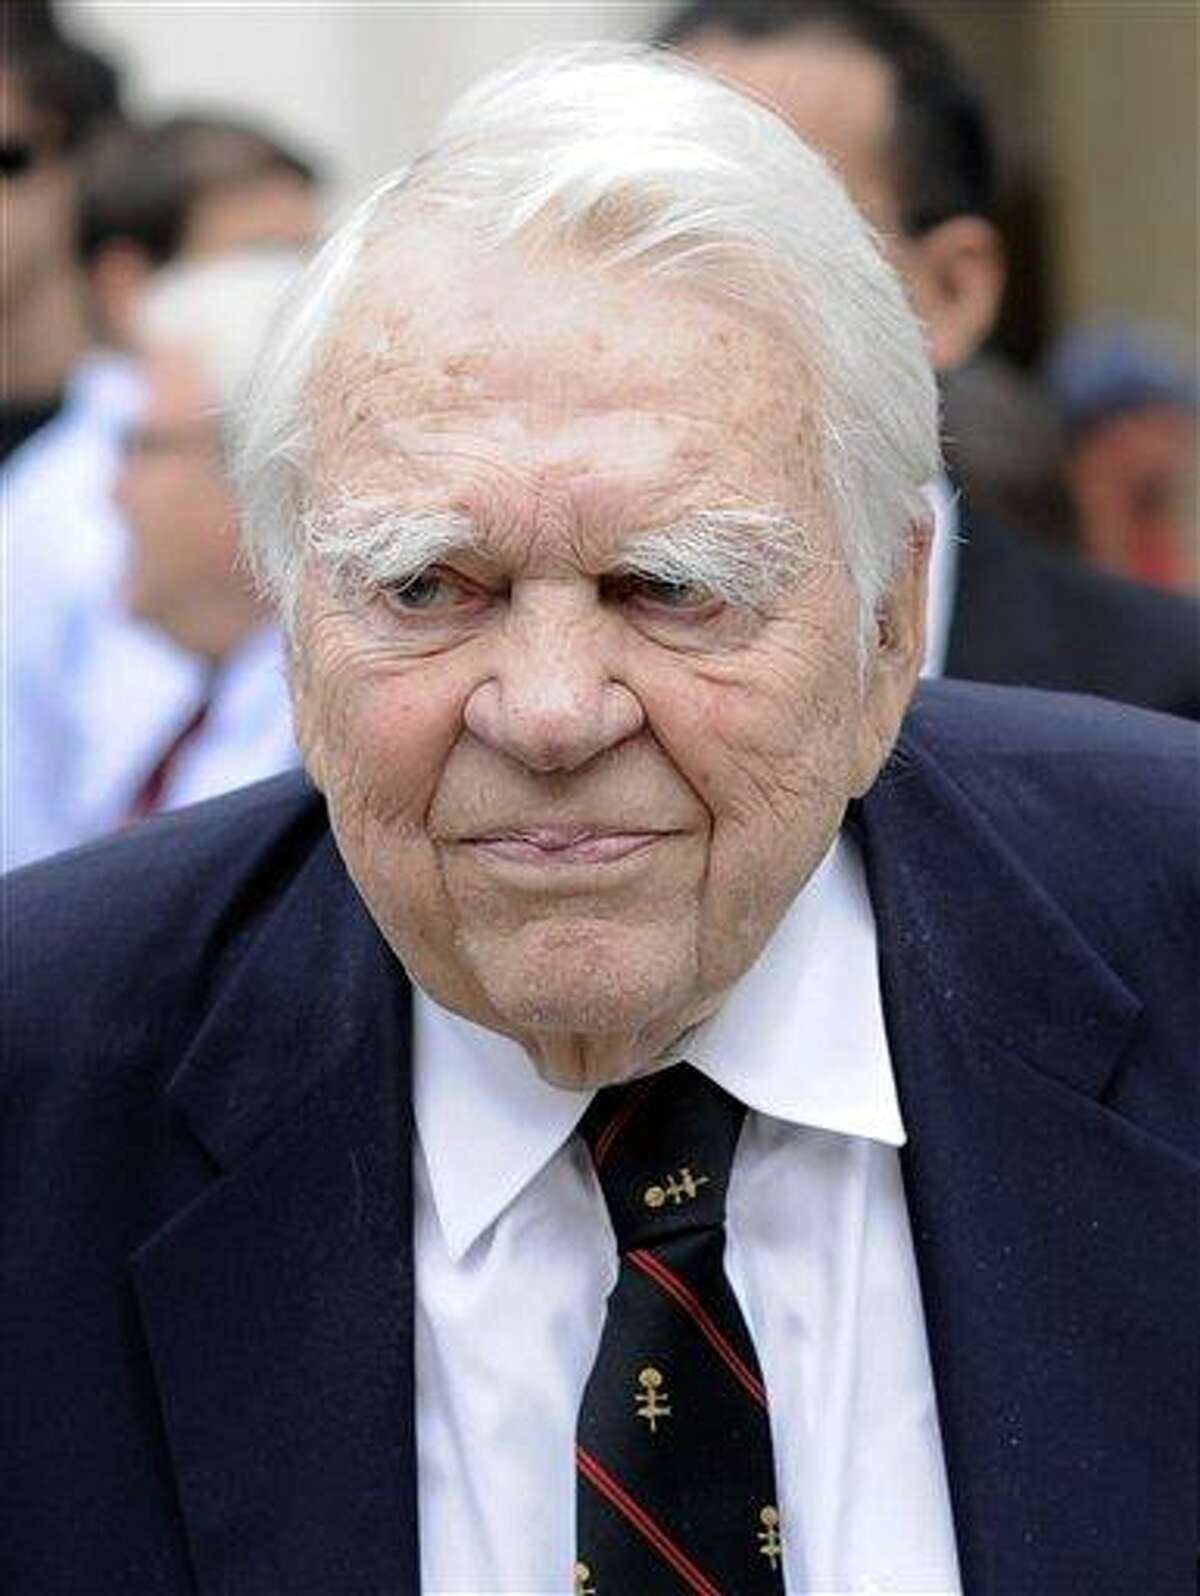 In this Aug. 9, 2009 file photo, 60 Minutes' Andy Rooney, center leaves the Celebration of Life Memorial ceremony for Walter Cronkite at Avery Fisher Hall in New York. CBS says former "60 Minutes" commentator Andy Rooney died Friday, Nov. 4, 2011 at age 92.